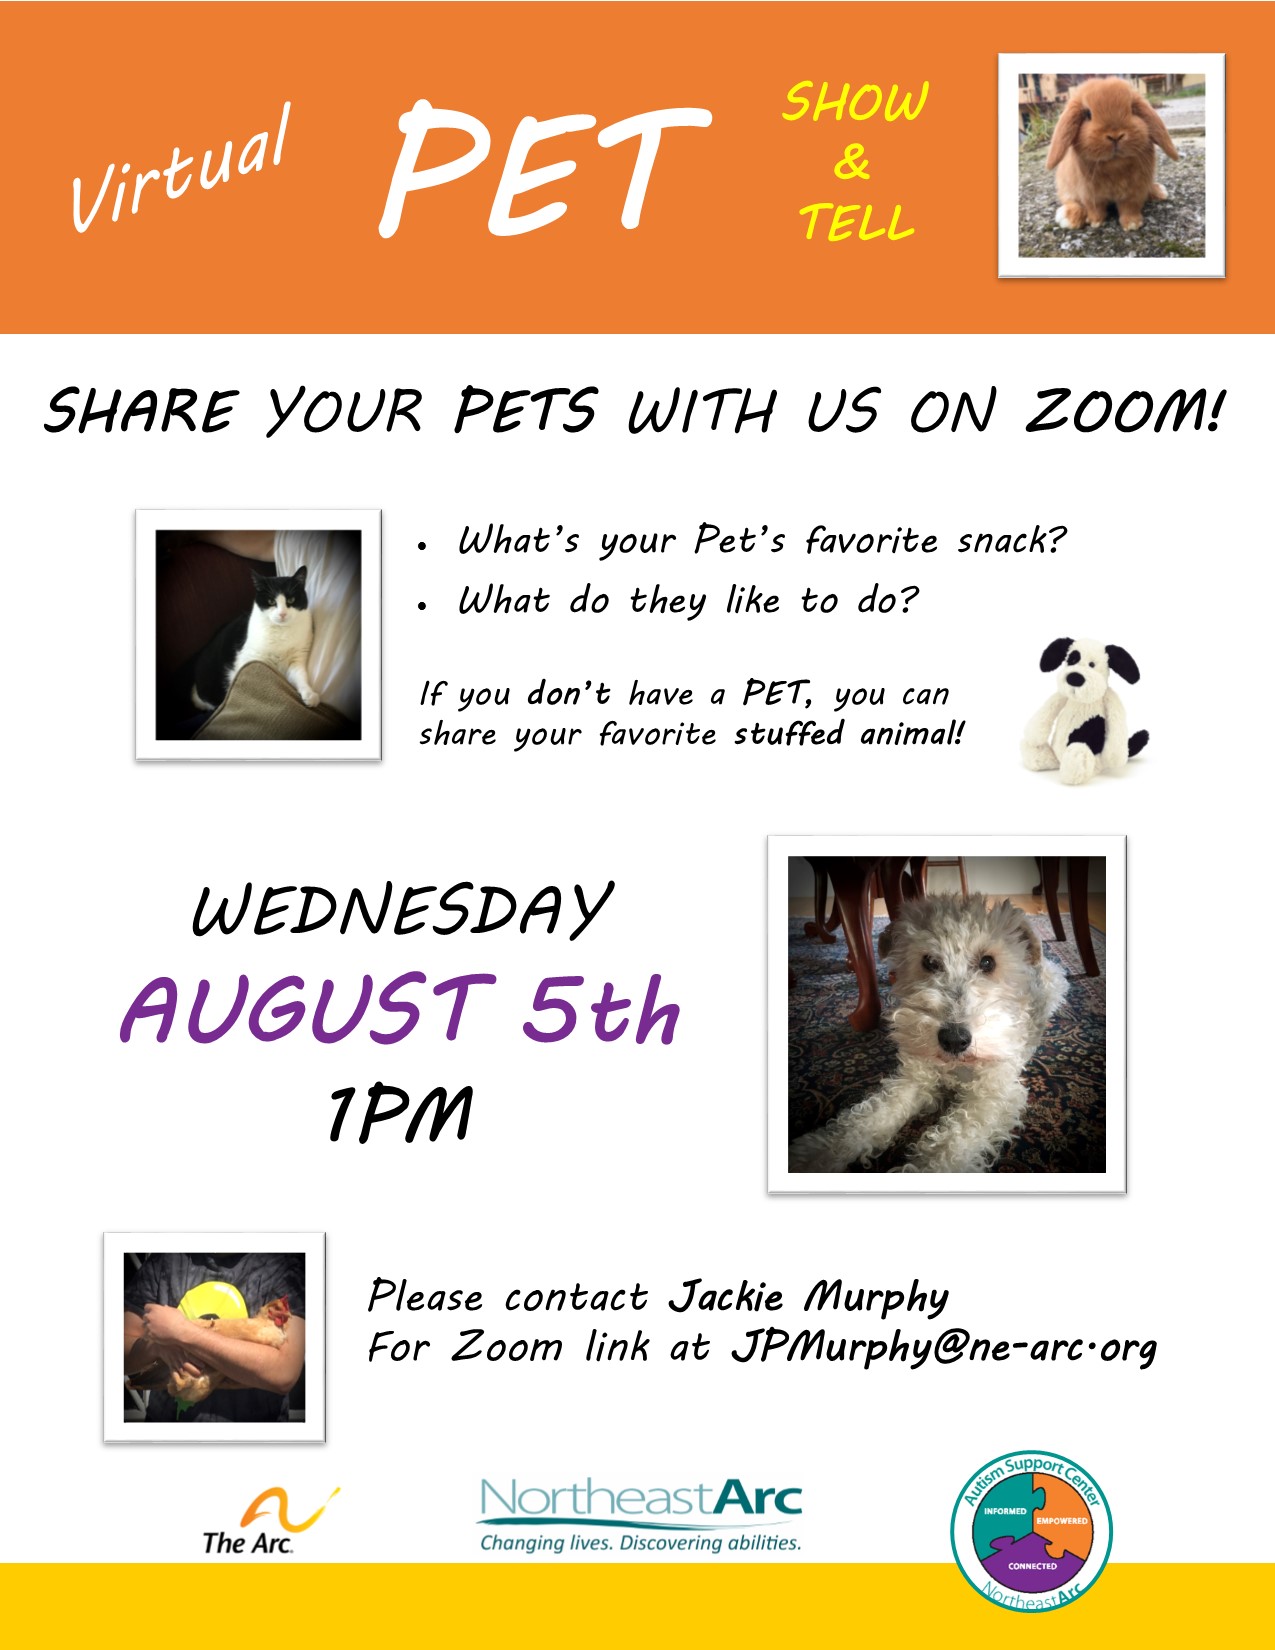 Flyer for "Virtual" Pet Show & Tell Event